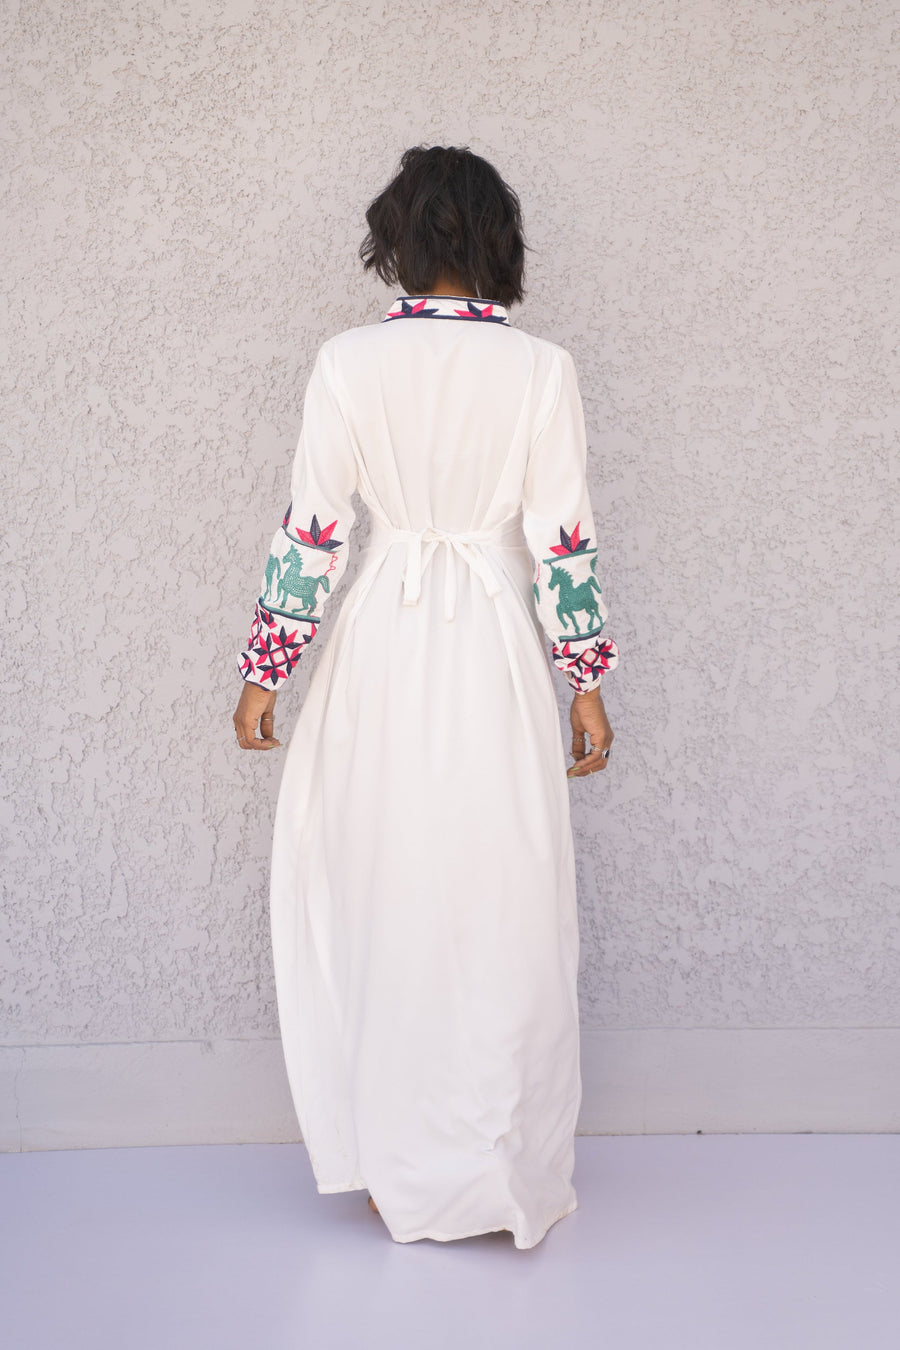 Chic White embroidered cotton Caftan, caftans for women, Kaftans, embroidered Caftan dress, Caftan maxi dress, Caftans for women, Caftans